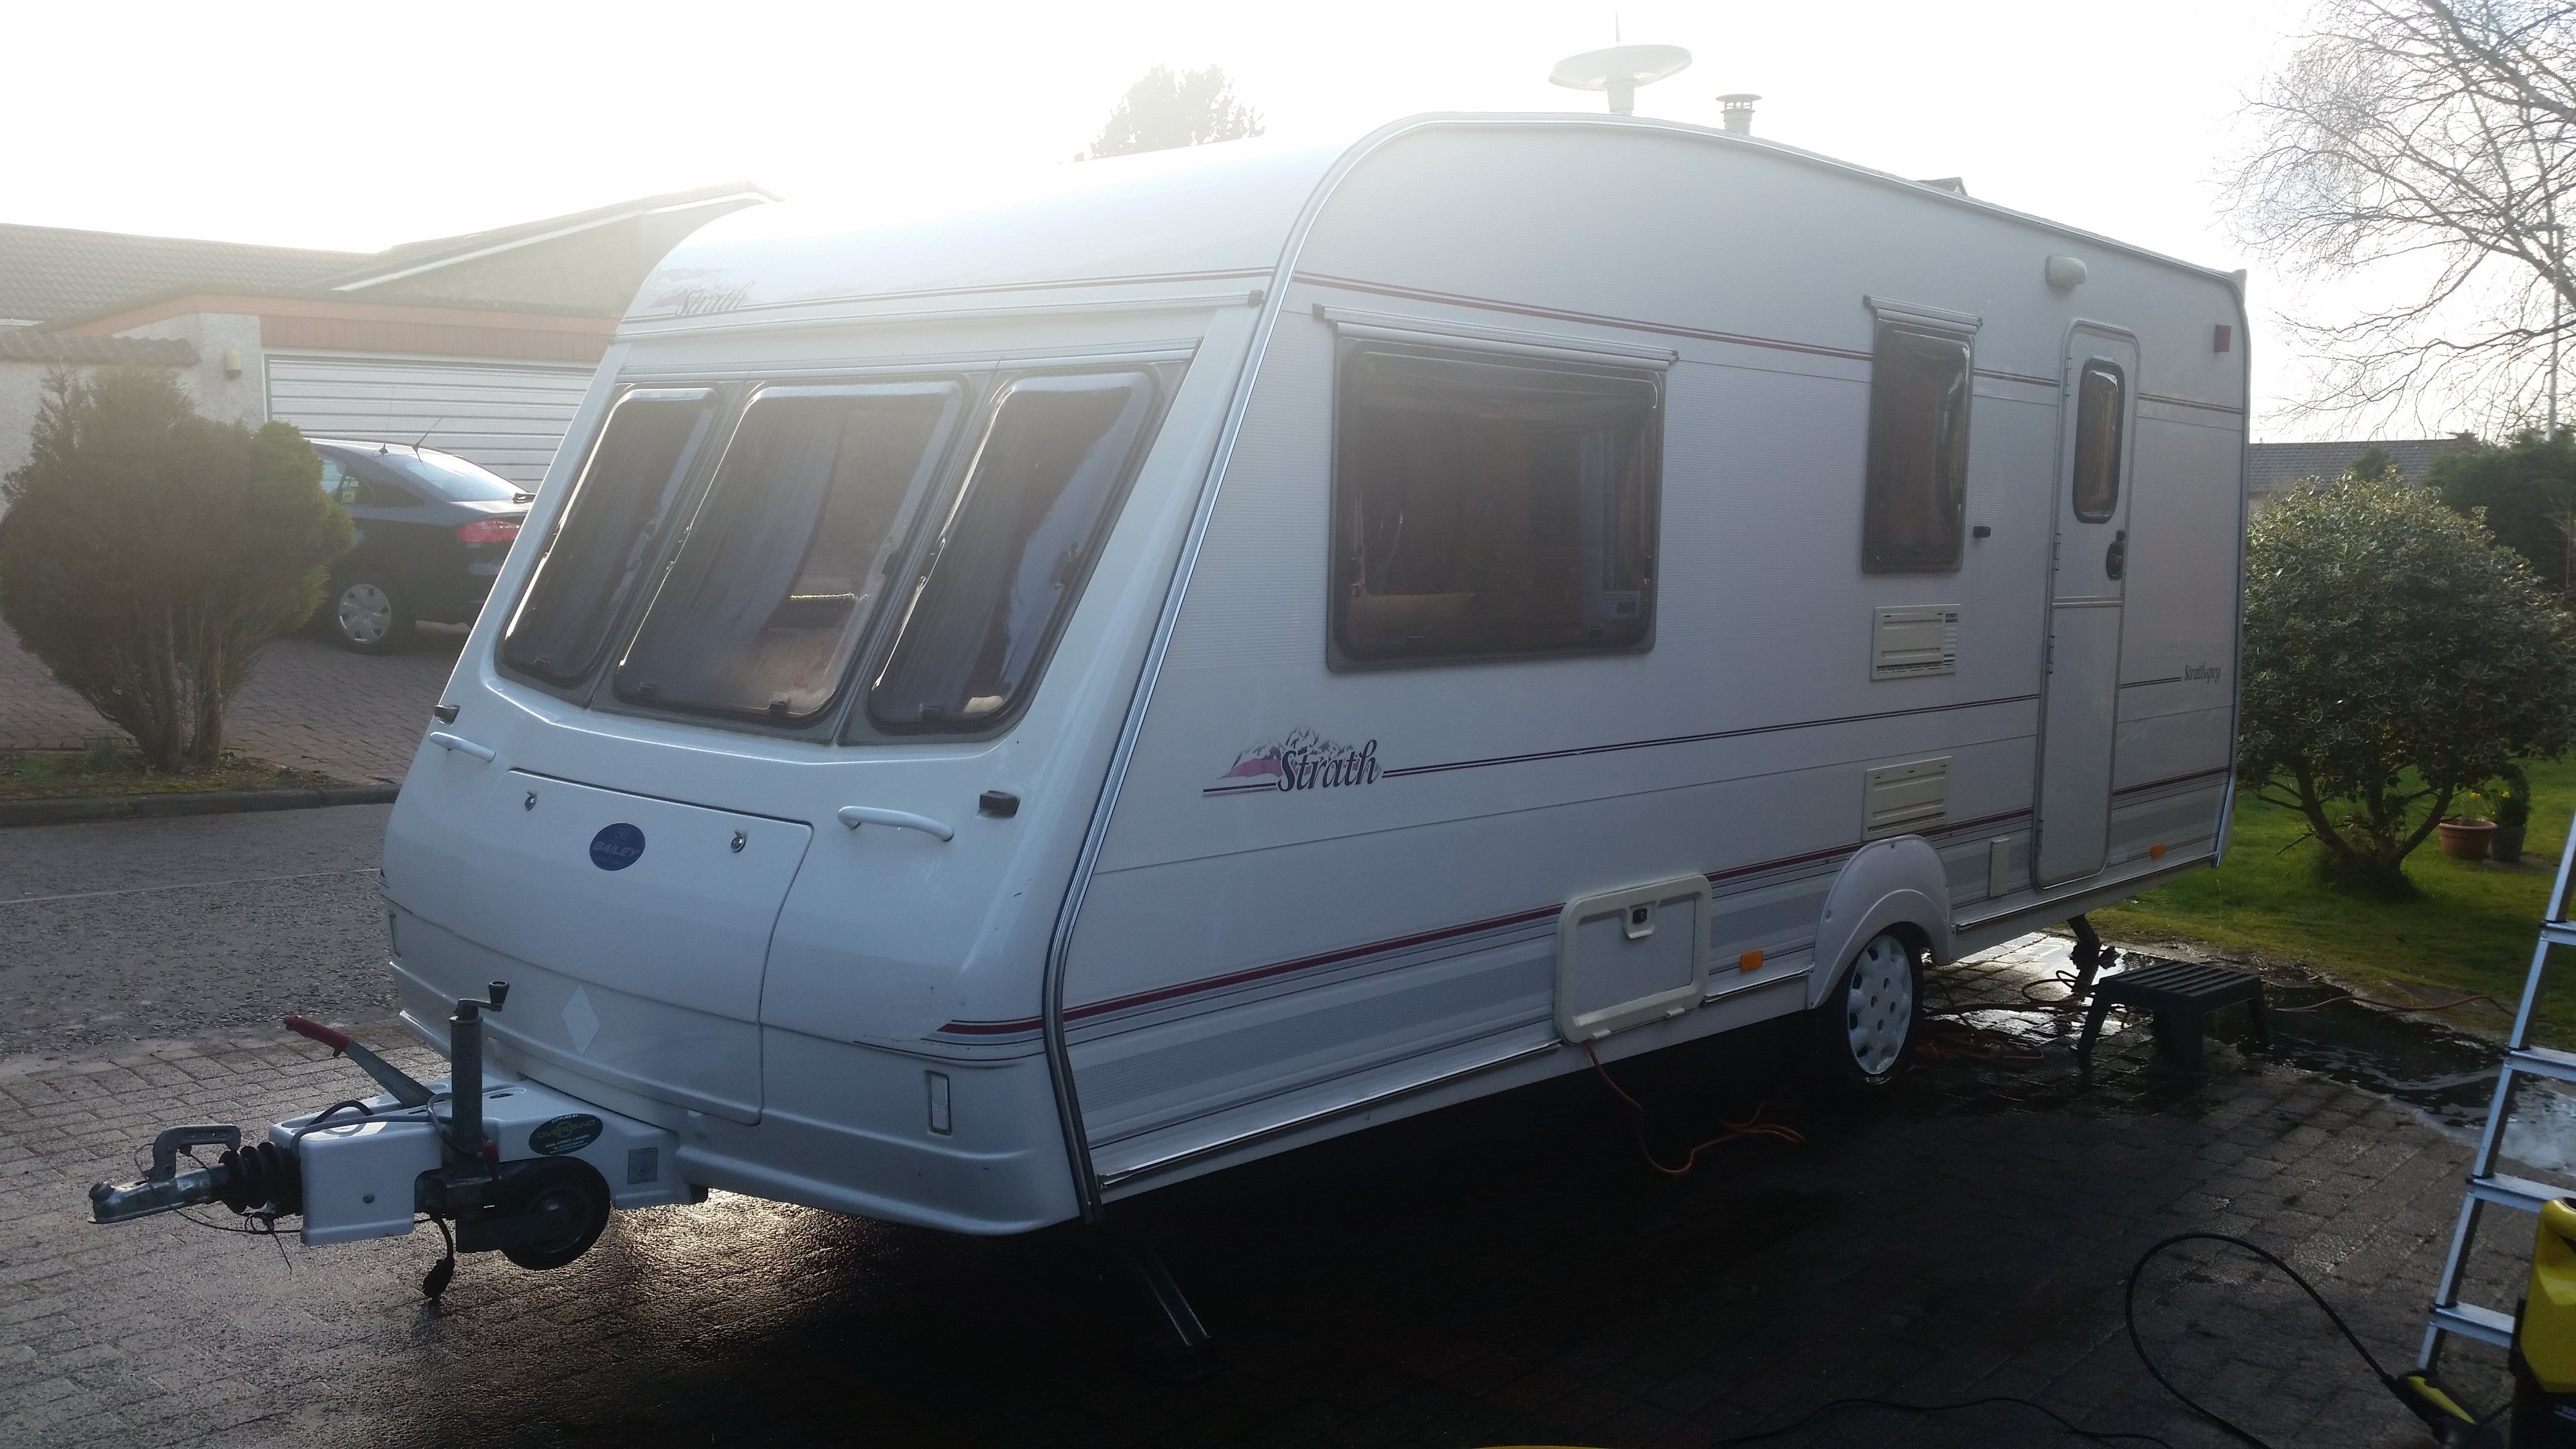 Show us your gear (tents to motorhomes) - Page 22 - Tents, Caravans & Motorhomes - PistonHeads